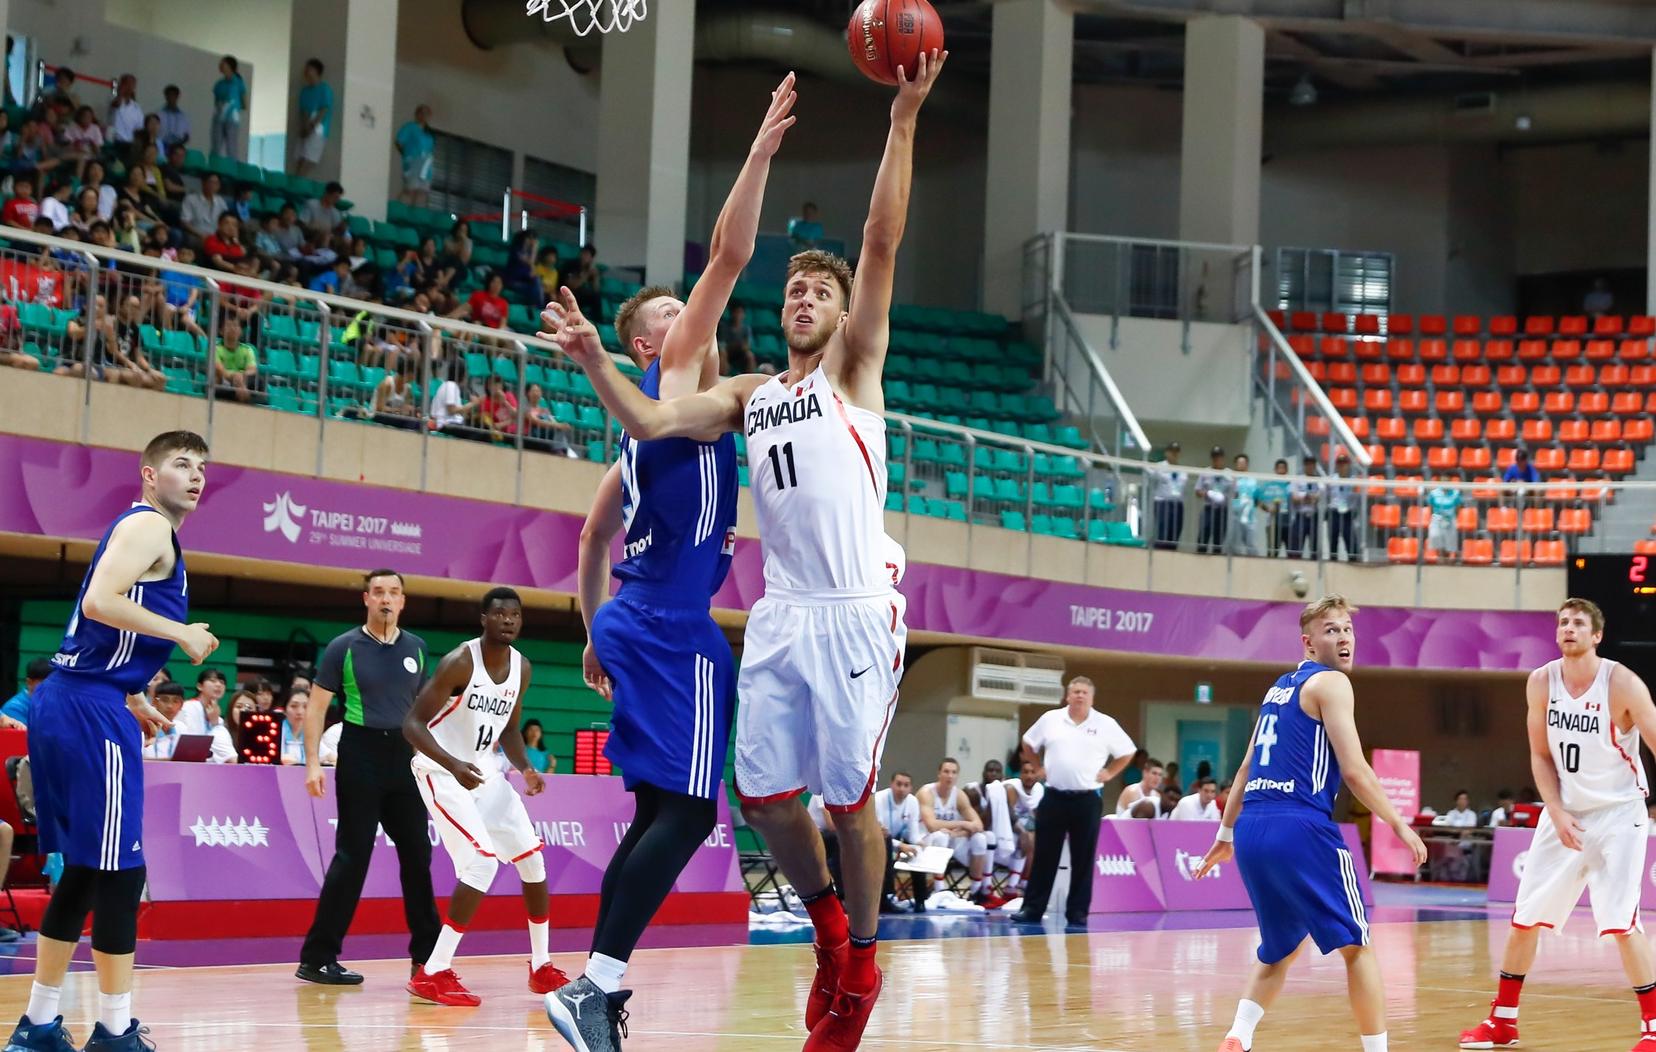 Mathieu Belanger / Erik Nissen goes up for a layup for Canada in men's basketball action against Finland on Monday, August 21. The Canadians lost 79-71 to the Finns.